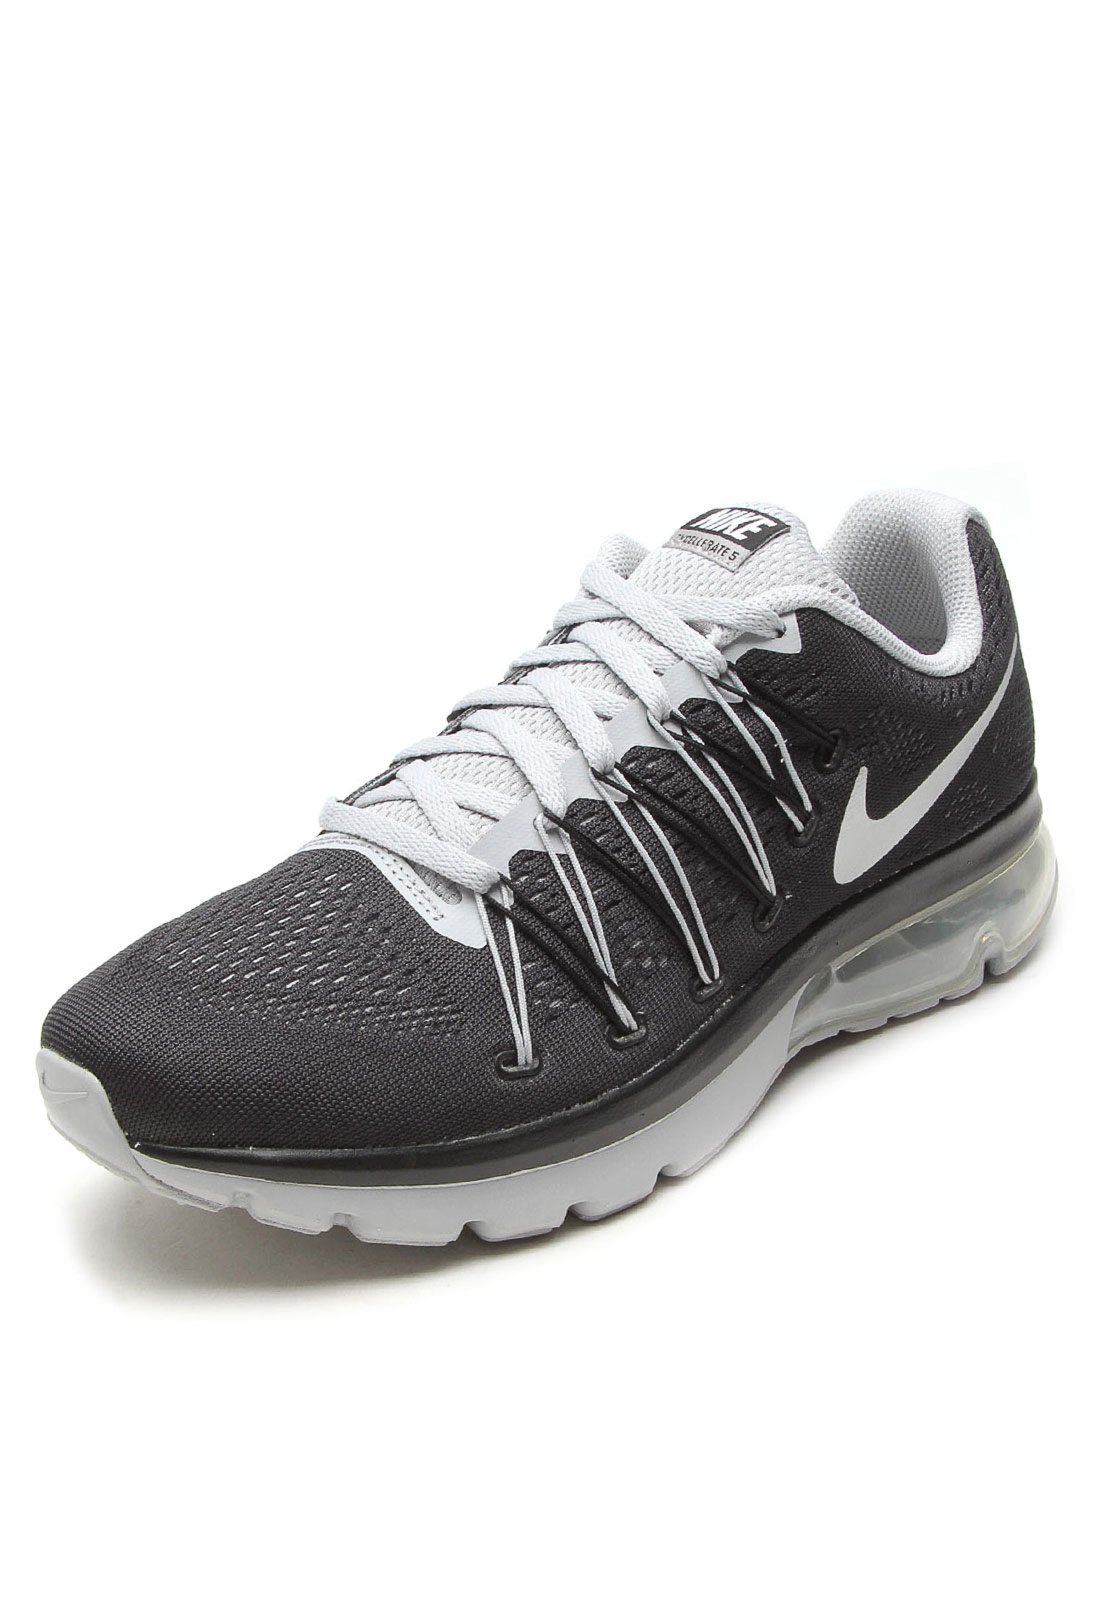 nike excellerate 5 masculino